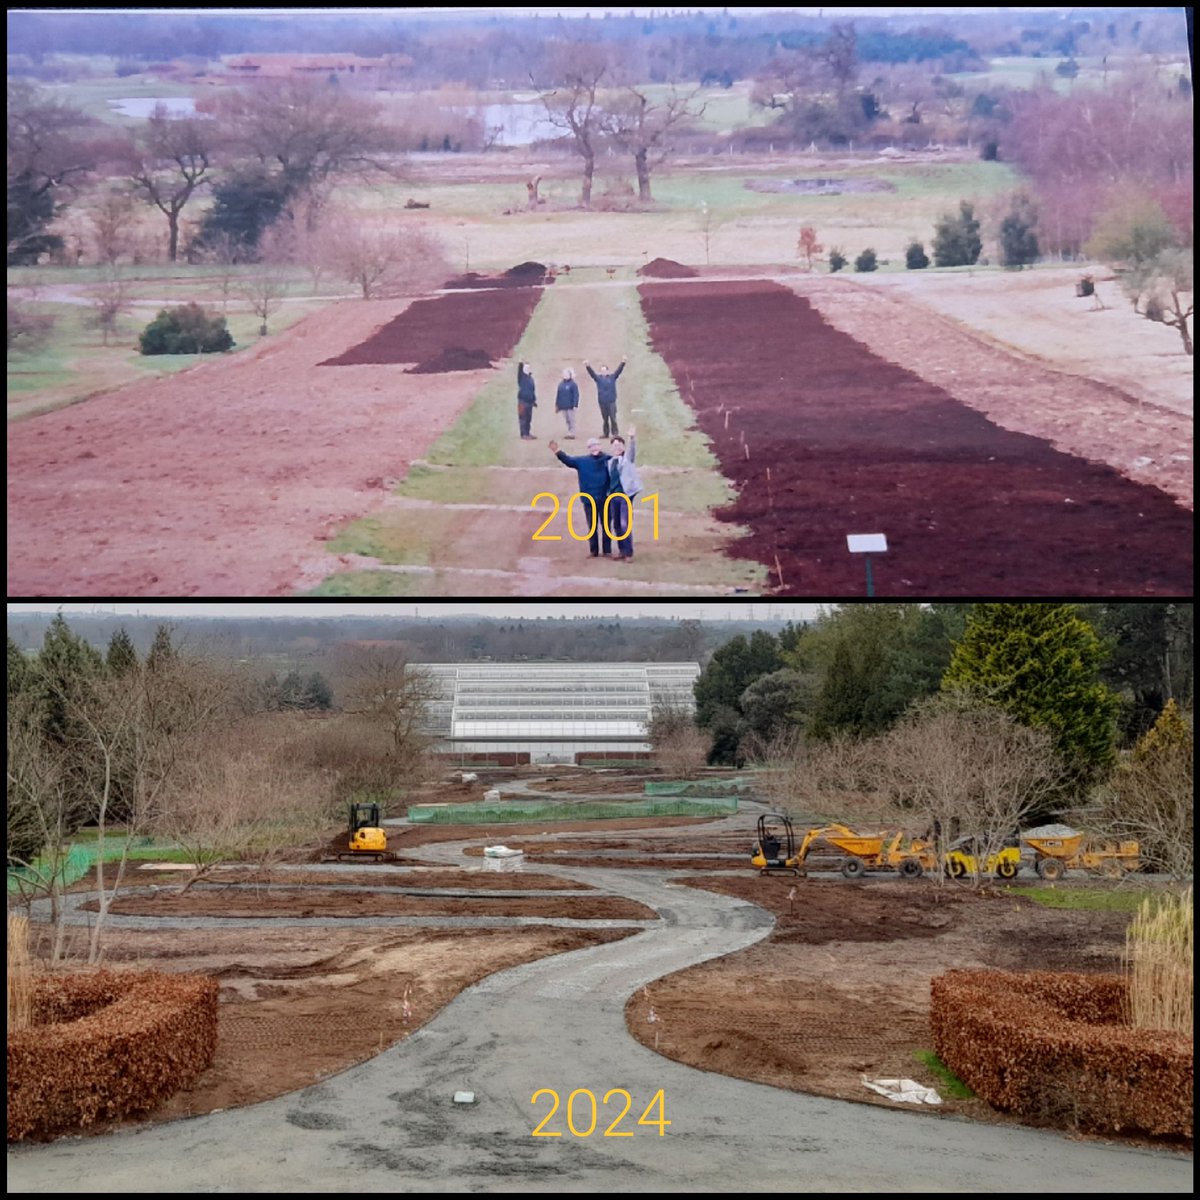 Preparation of the Piet Oudolf borders @RHSWisley 2001 v 2024 Its good to see the new design taking shape.